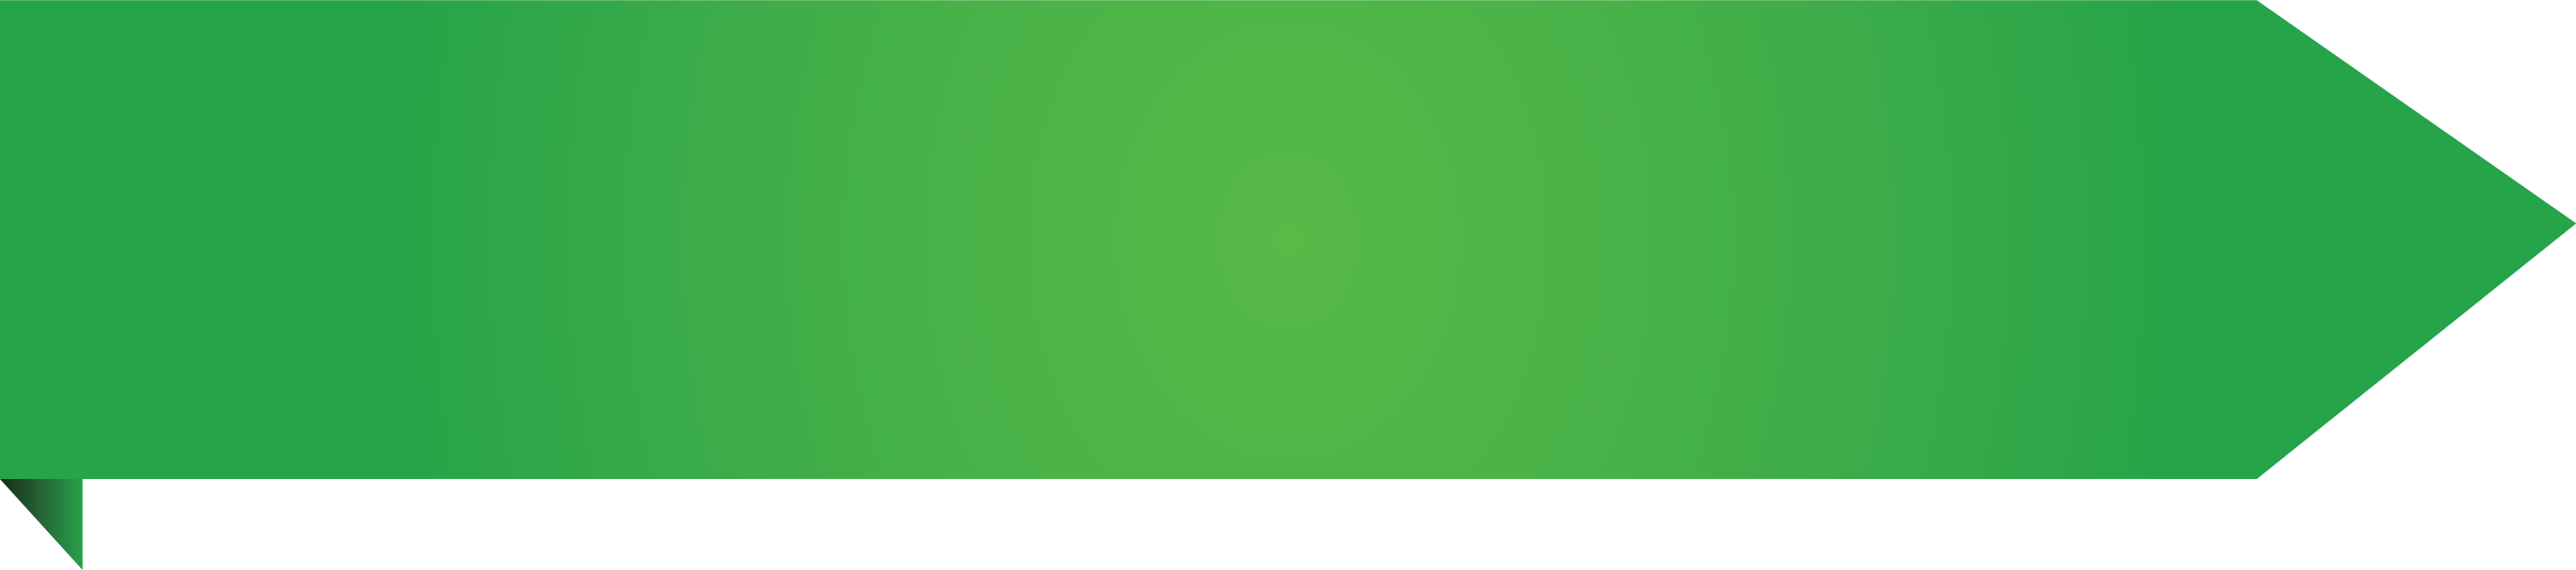 Free Green Banner Png, Download Free Green Banner Png png images, Free